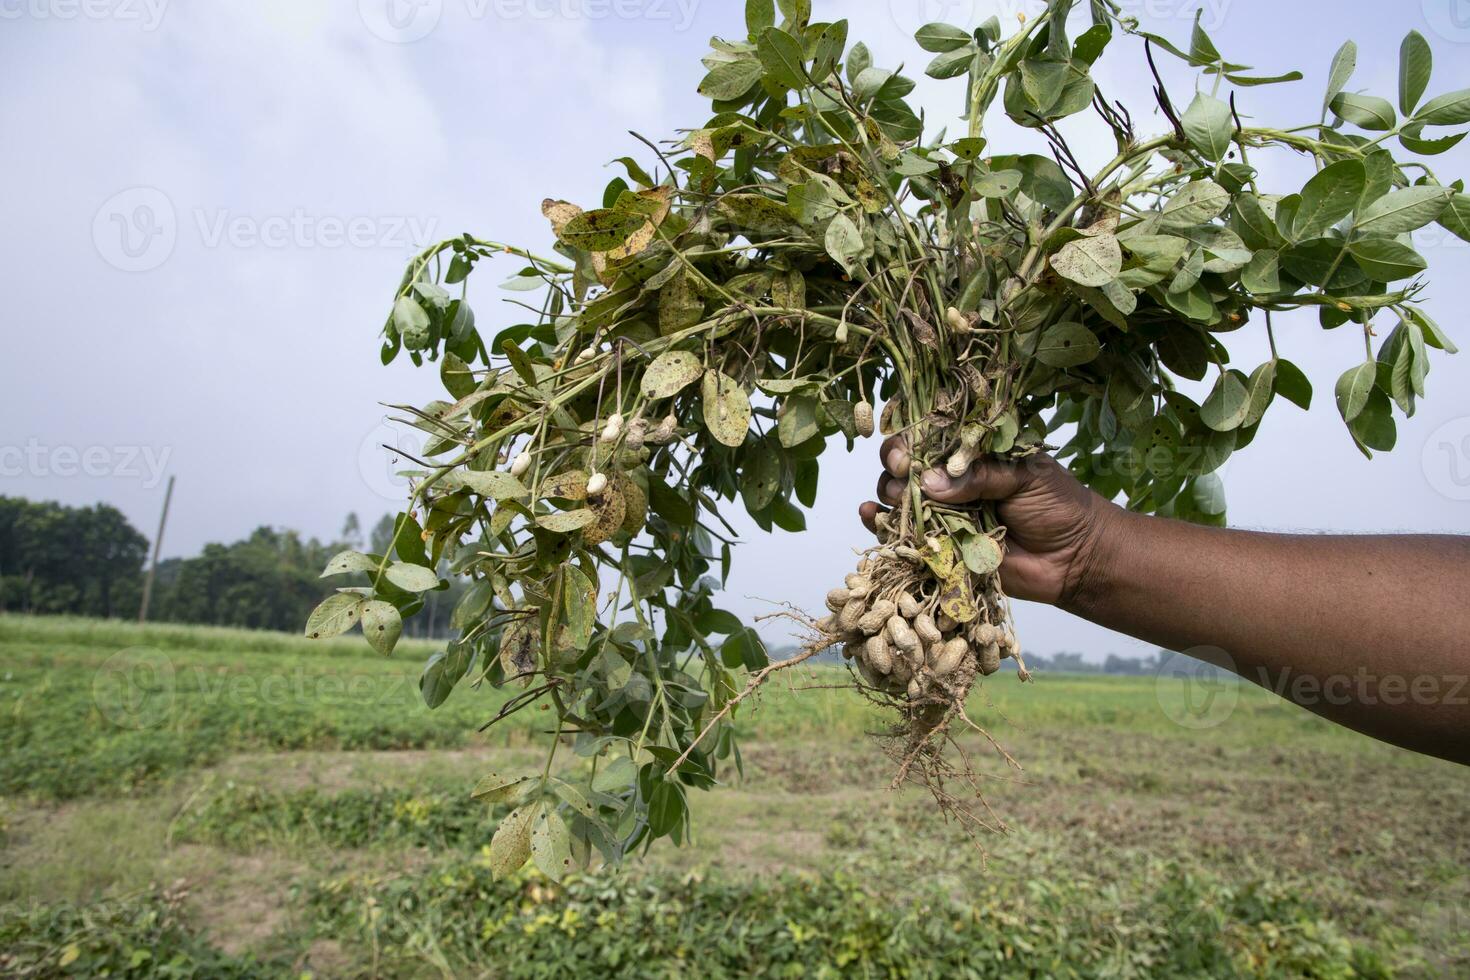 peanut on farmer's hand in the field. Agriculture harvest concept photo